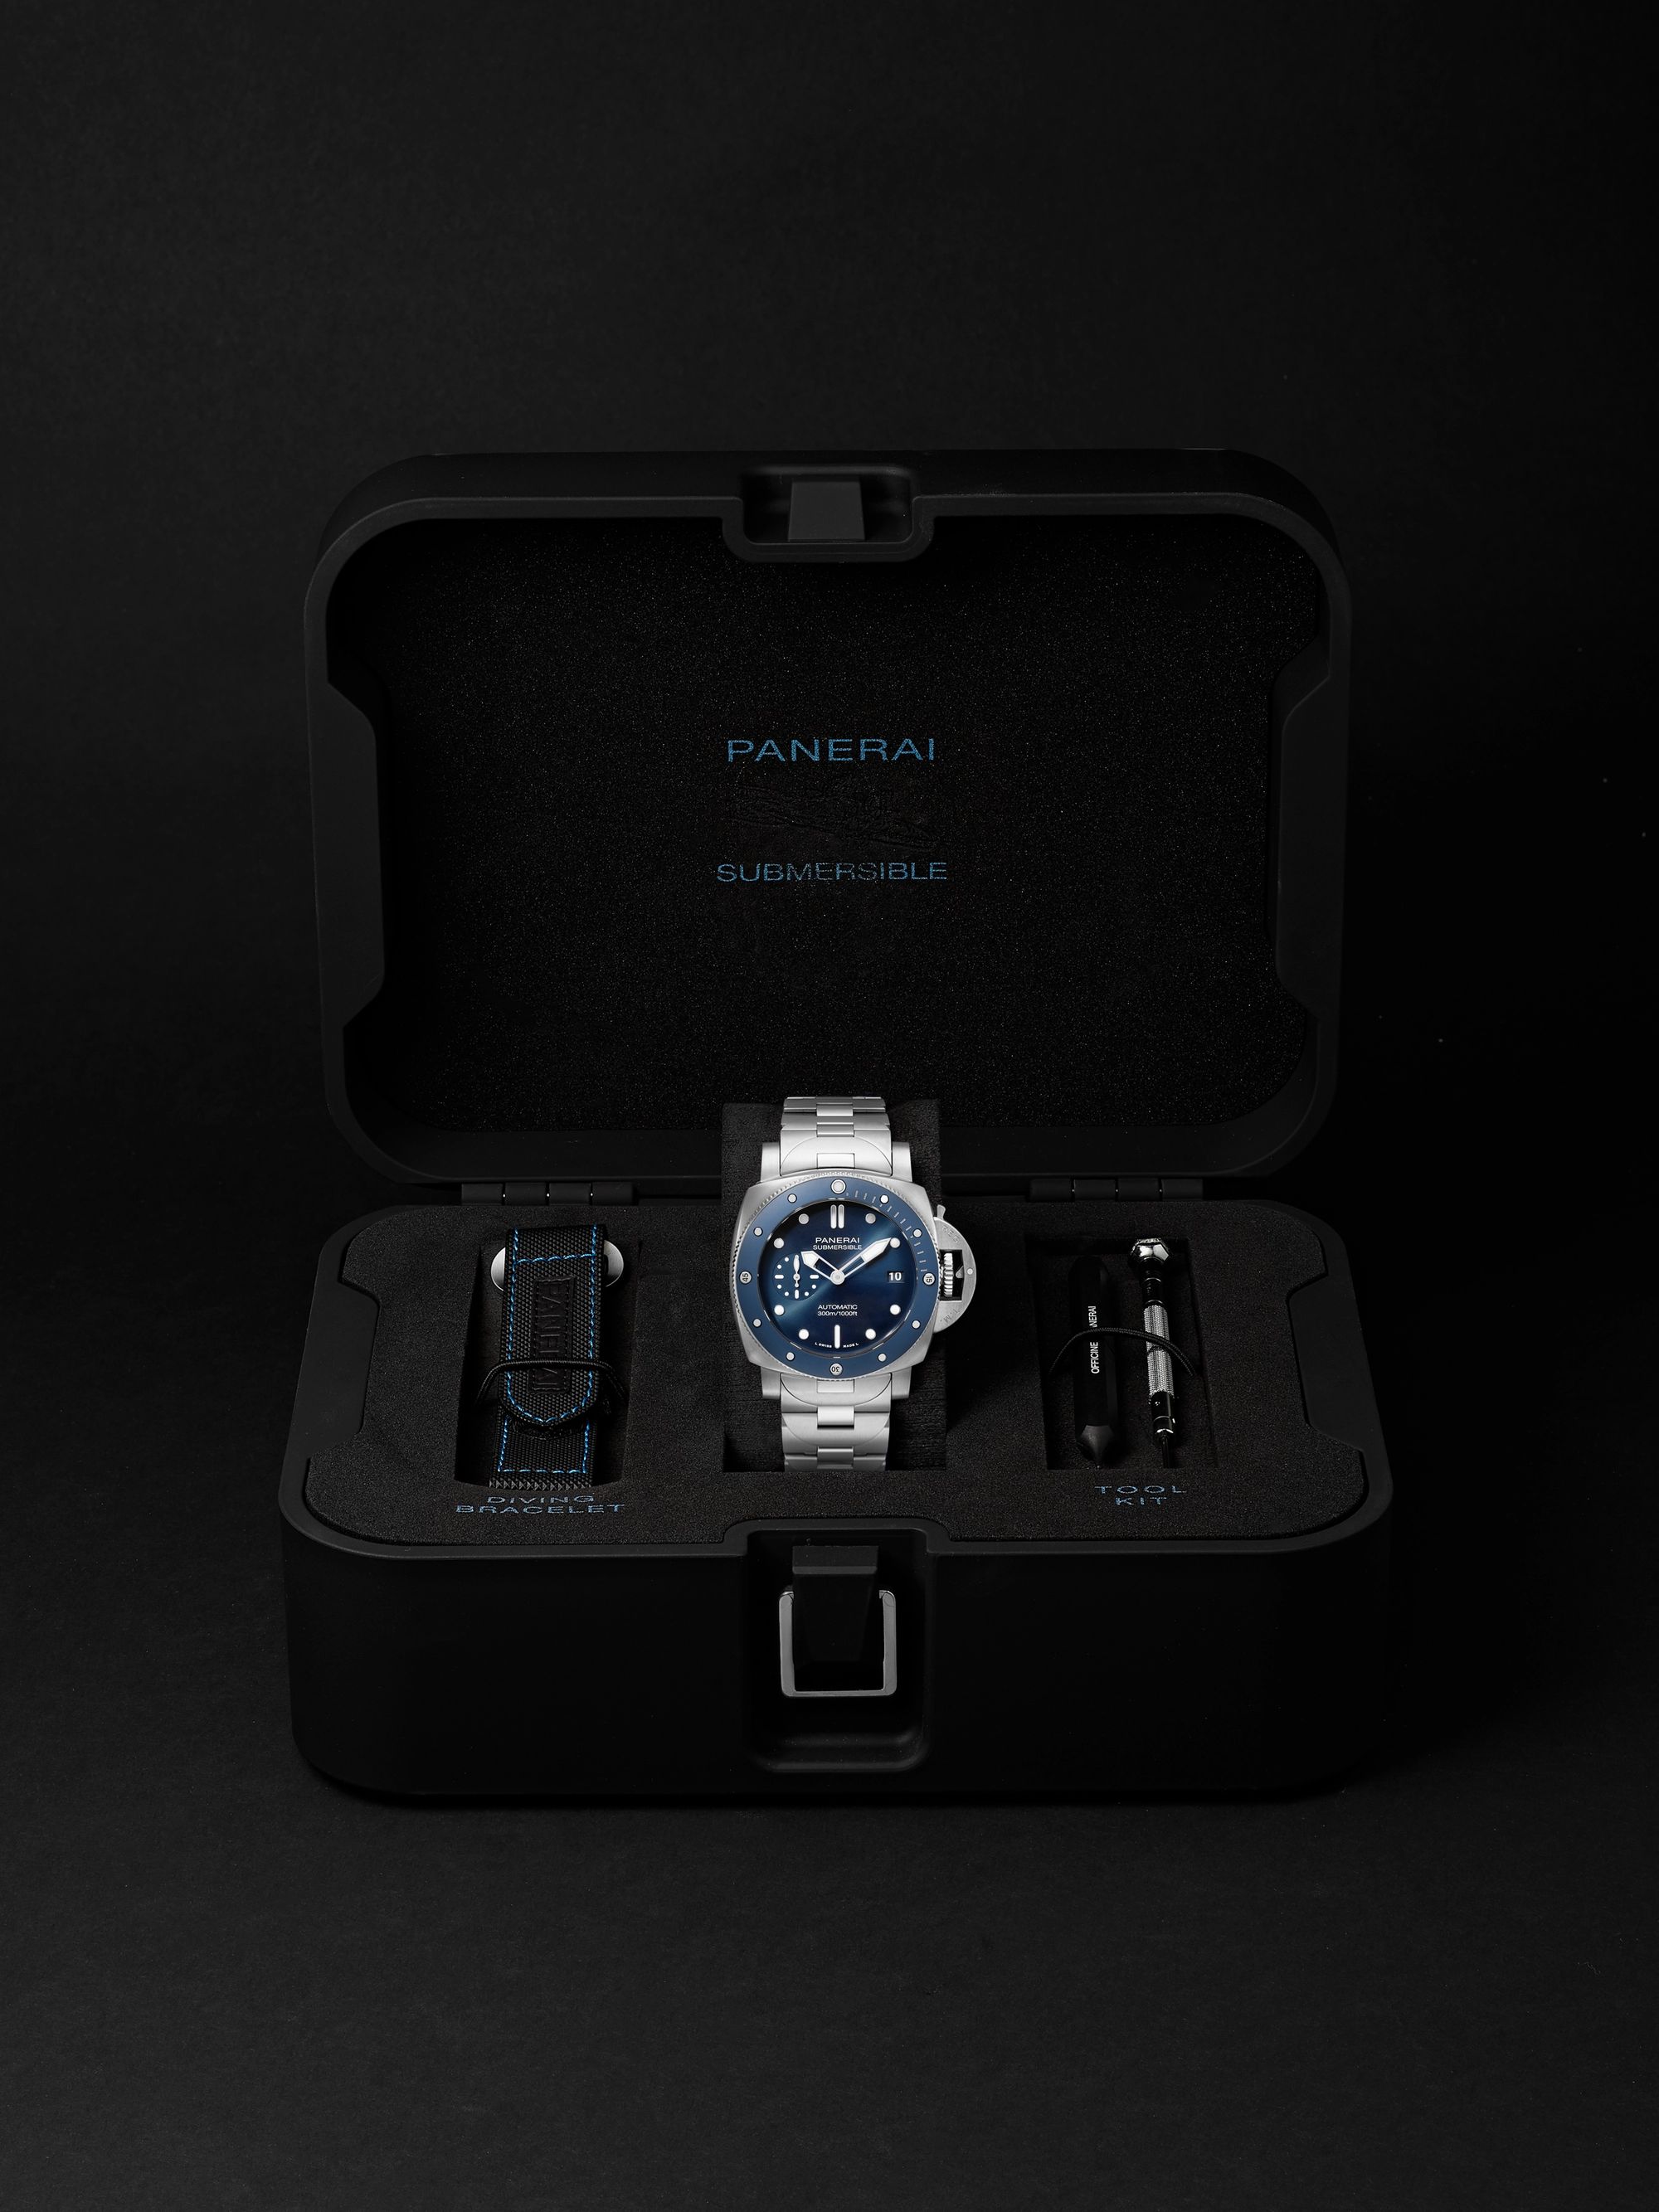 PANERAI Submersible Blu Notte Automatic 42mm Stainless Steel Watch, Ref. No. PAM01068